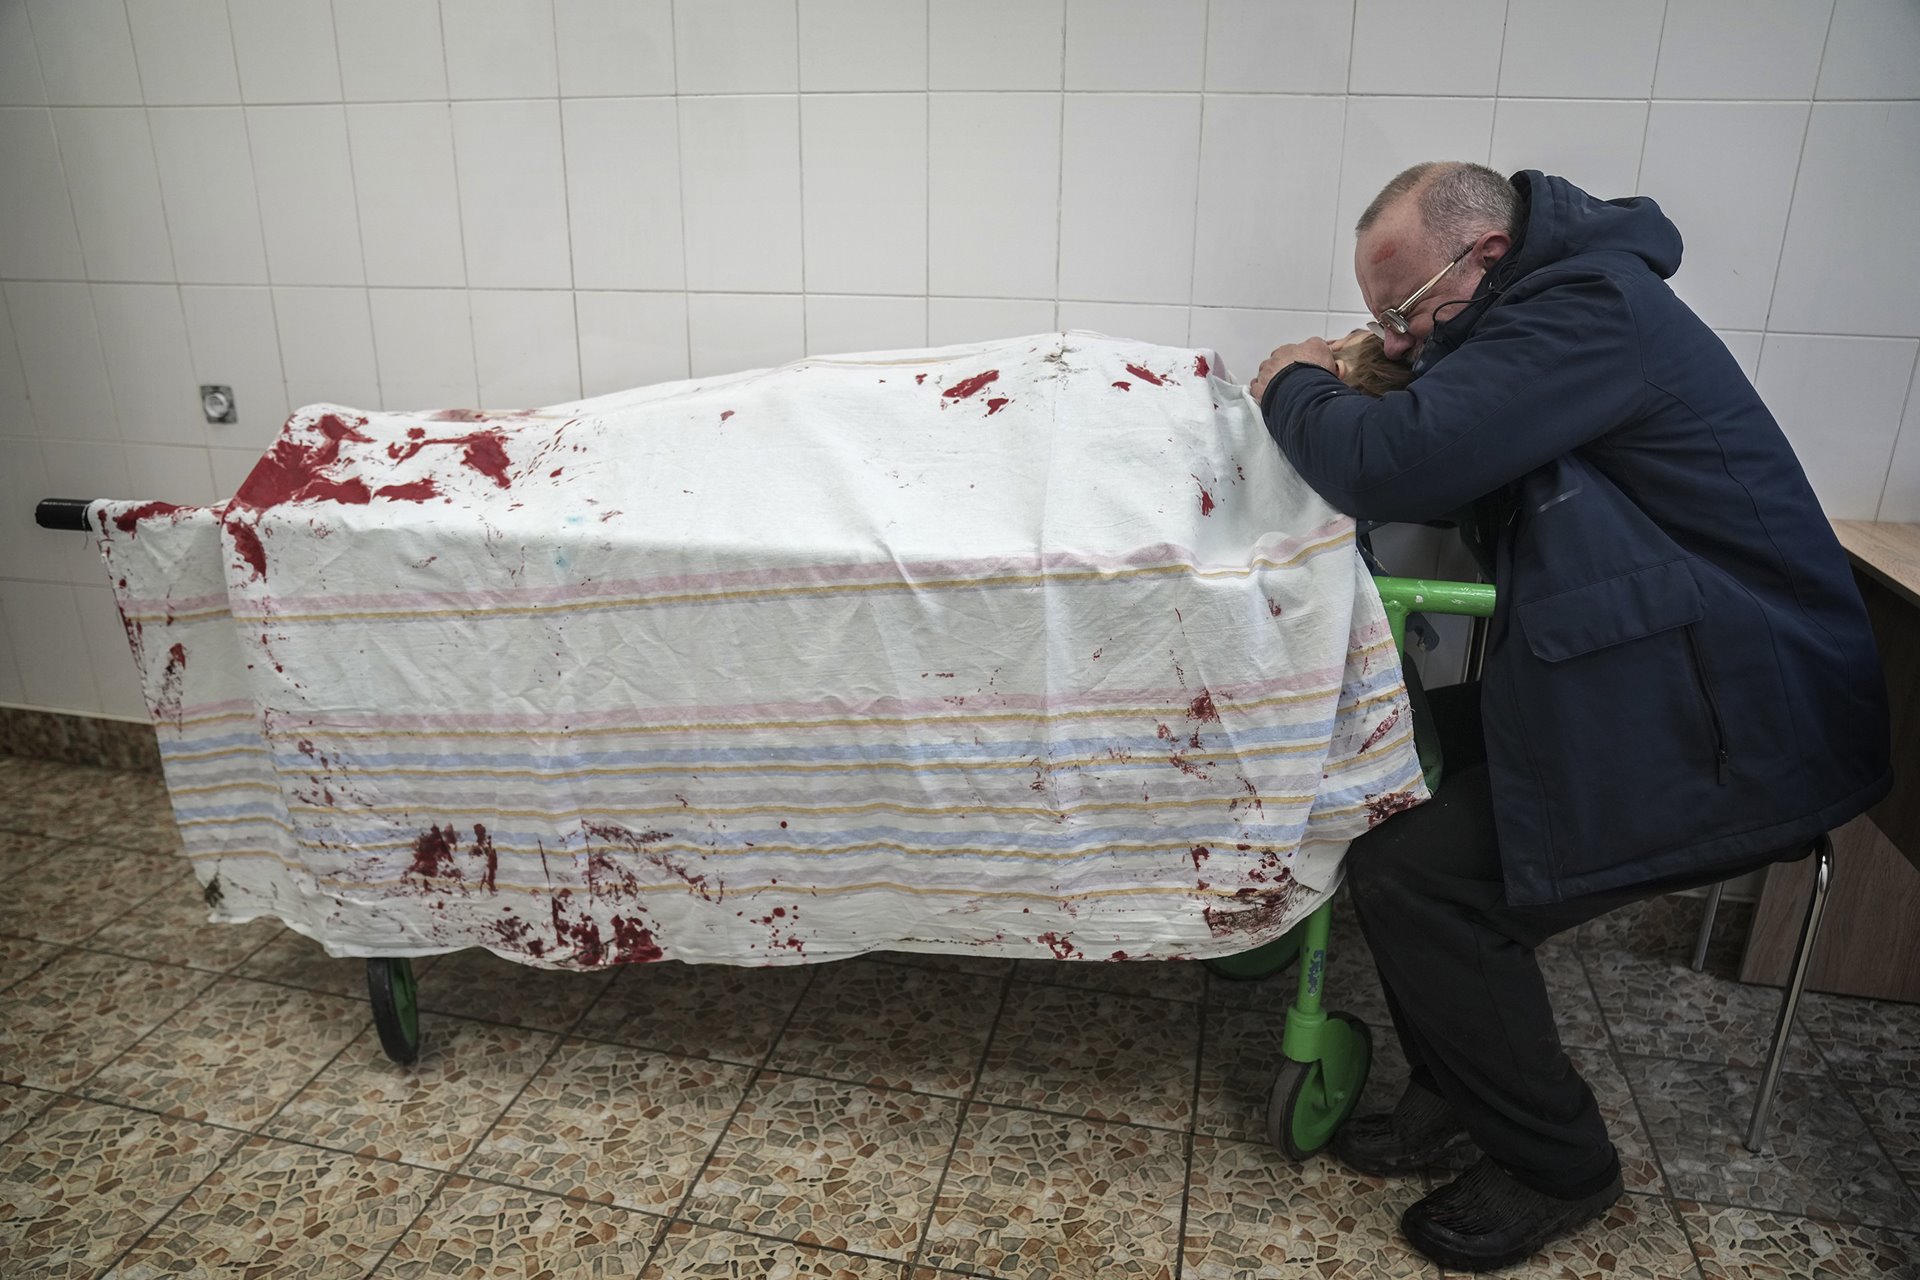 Serhii, father of Iliya (15), cries as his son&#39;s lifeless body lies on a stretcher in a maternity hospital being used as a medical emergency facility, in Mariupol, Ukraine. Iliya was playing football with his friends when a missile hit the field. His friends David and Artem were severely injured.